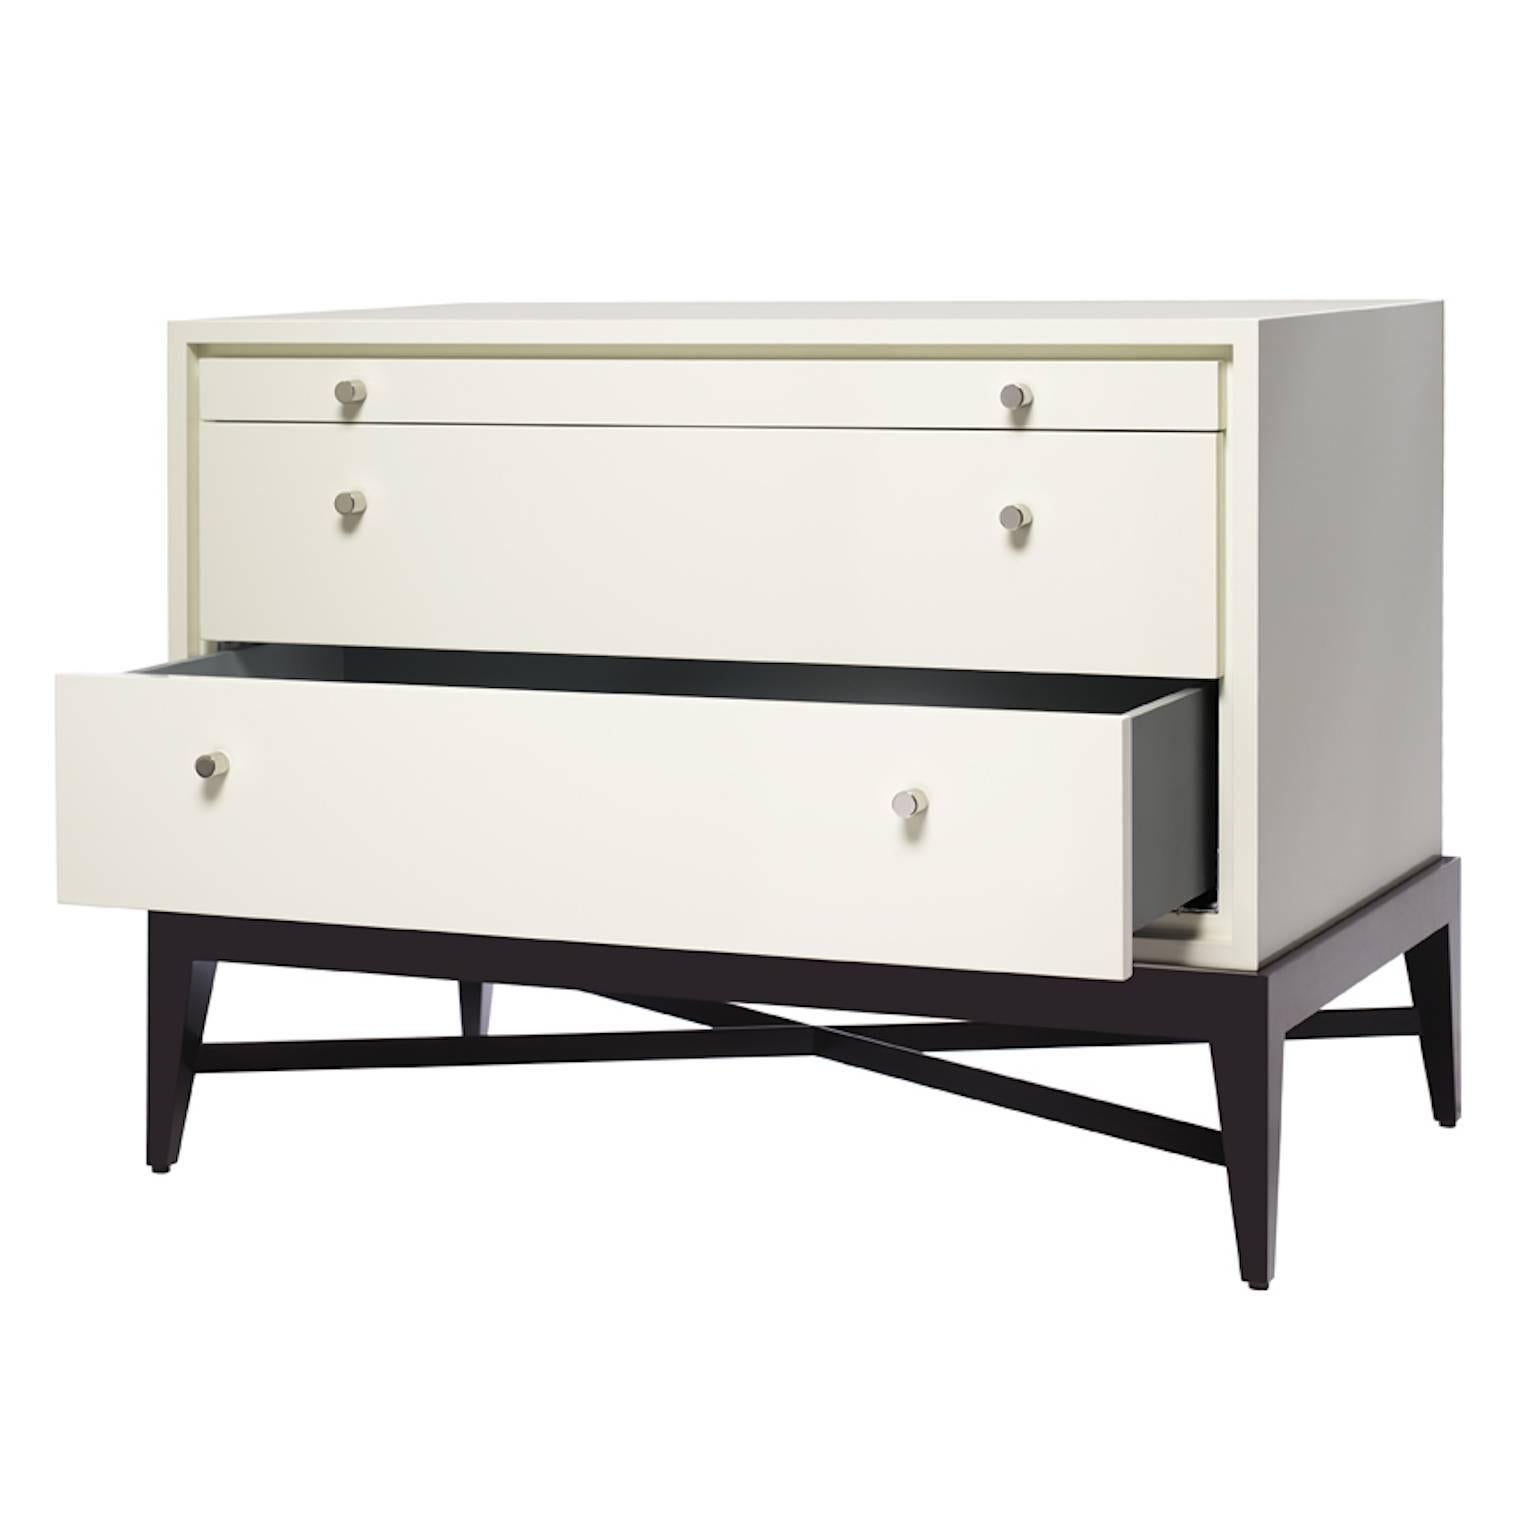 Wood or lacquer two-drawer chest with glass inset pullout tablet, metal pulls and show-wood base with tapered legs and X-stretcher. Lacquer drawer and tablet interiors.

As shown: Chalk white lacquer cabinet, slate lacquer interior, chocolate